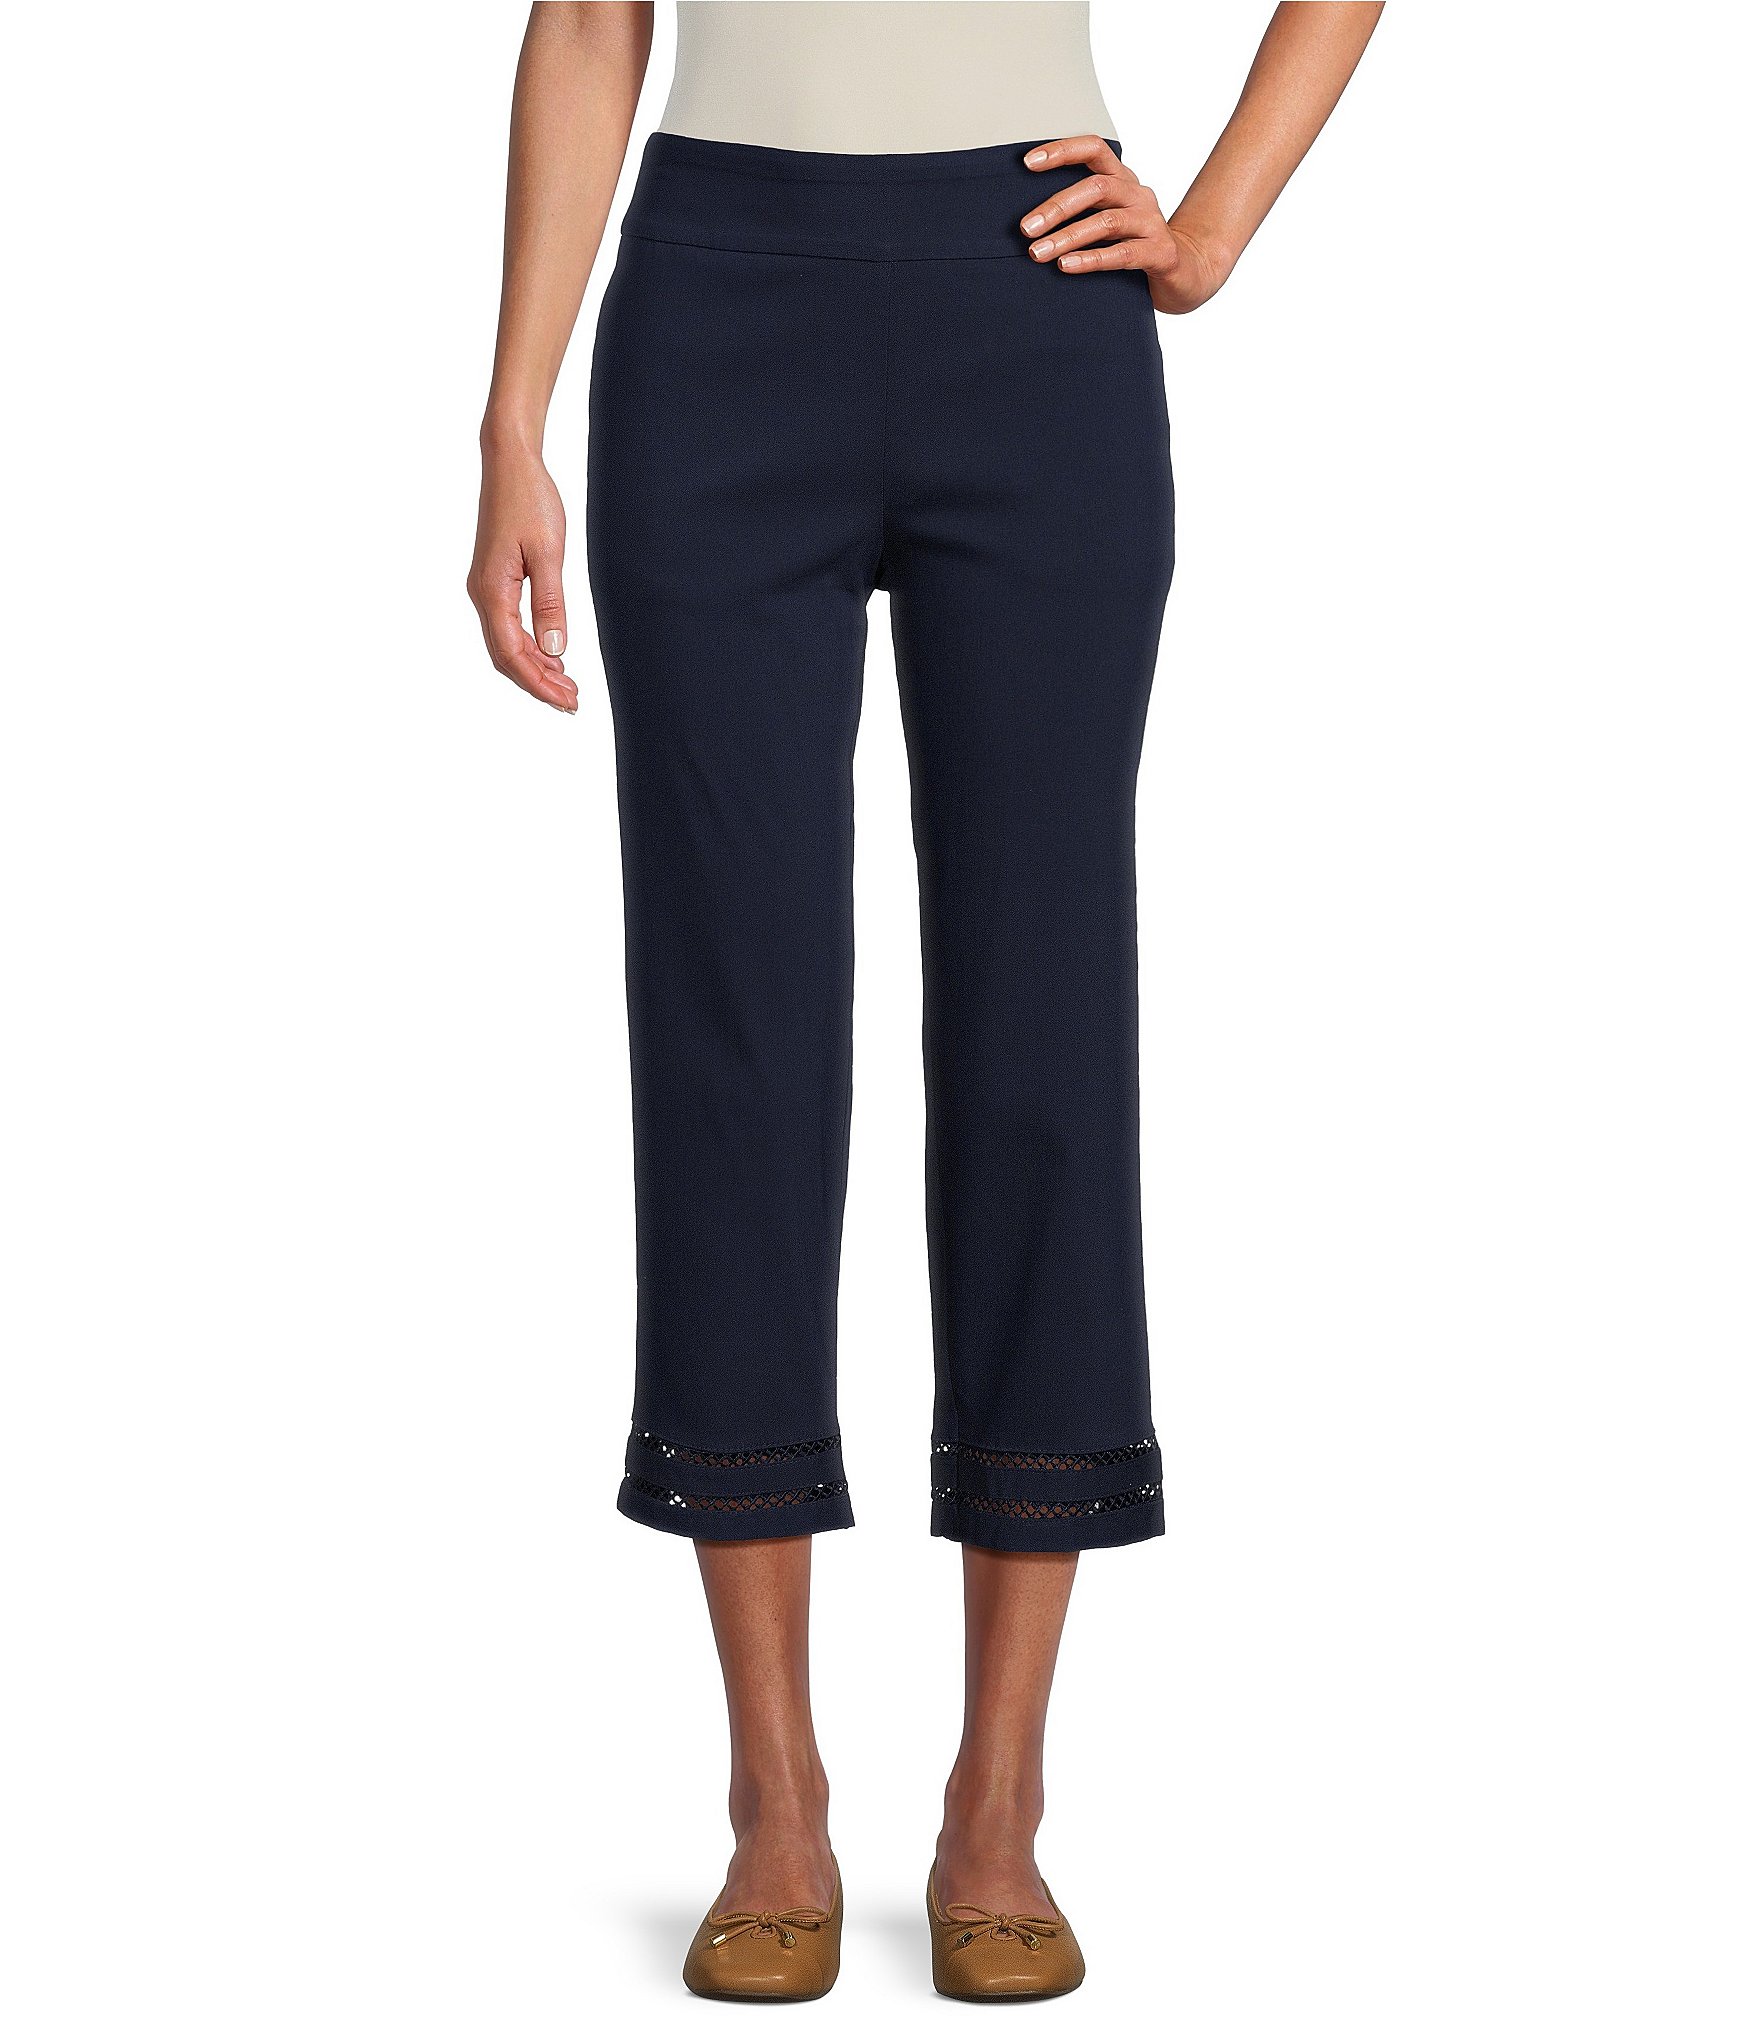 Jm Collection Plus Tummy Control Pull-On Capri Pants, Created for